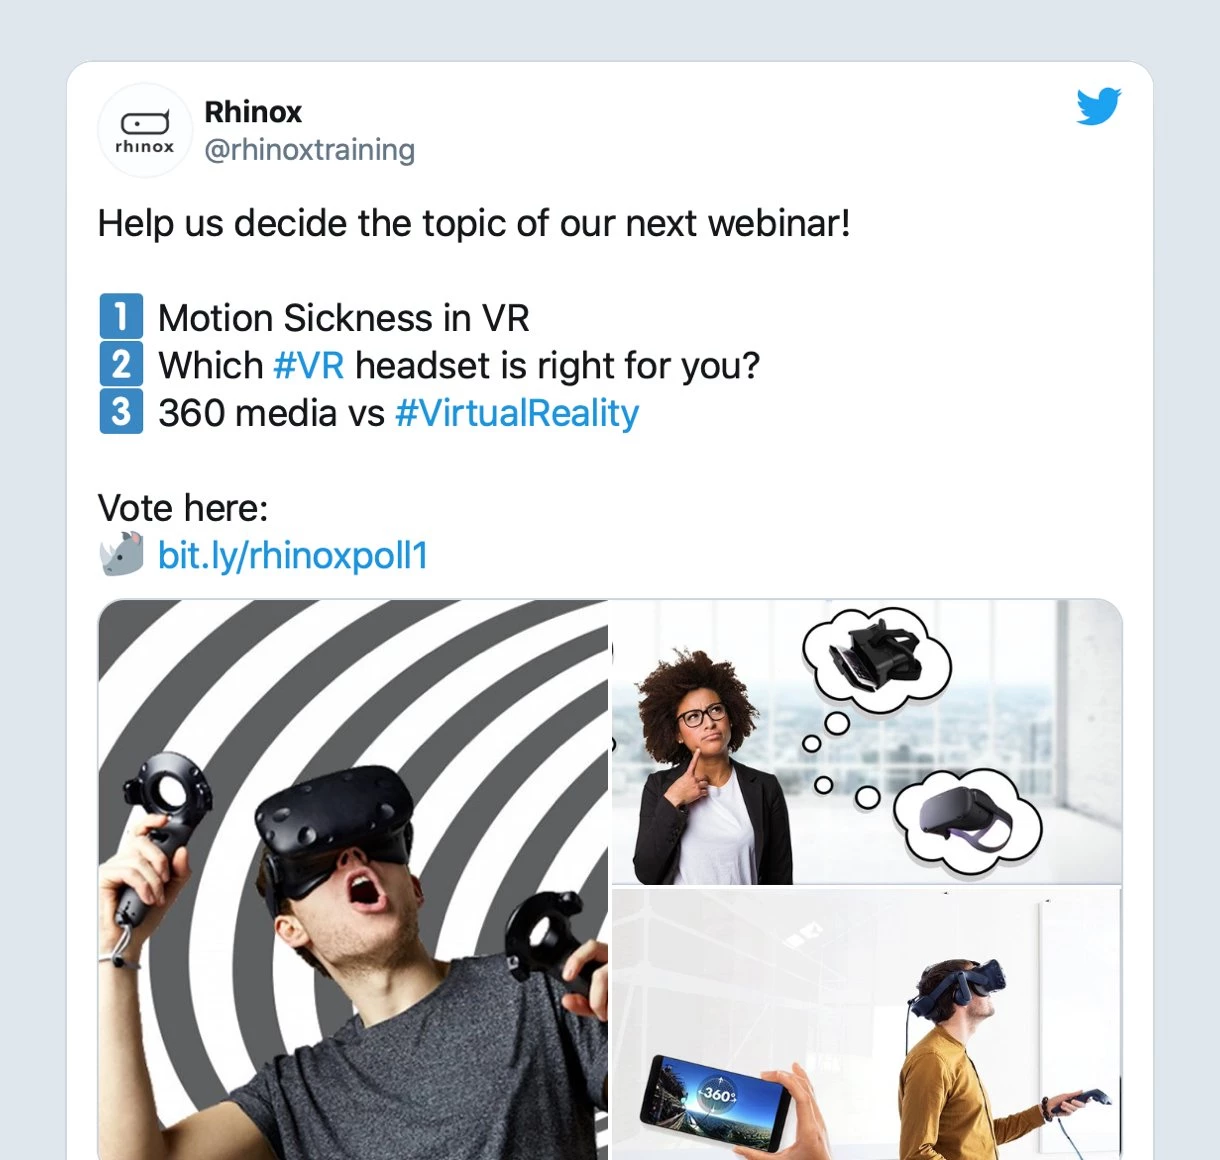 Vote for next Twitter webinar promotion example by Rhinox training